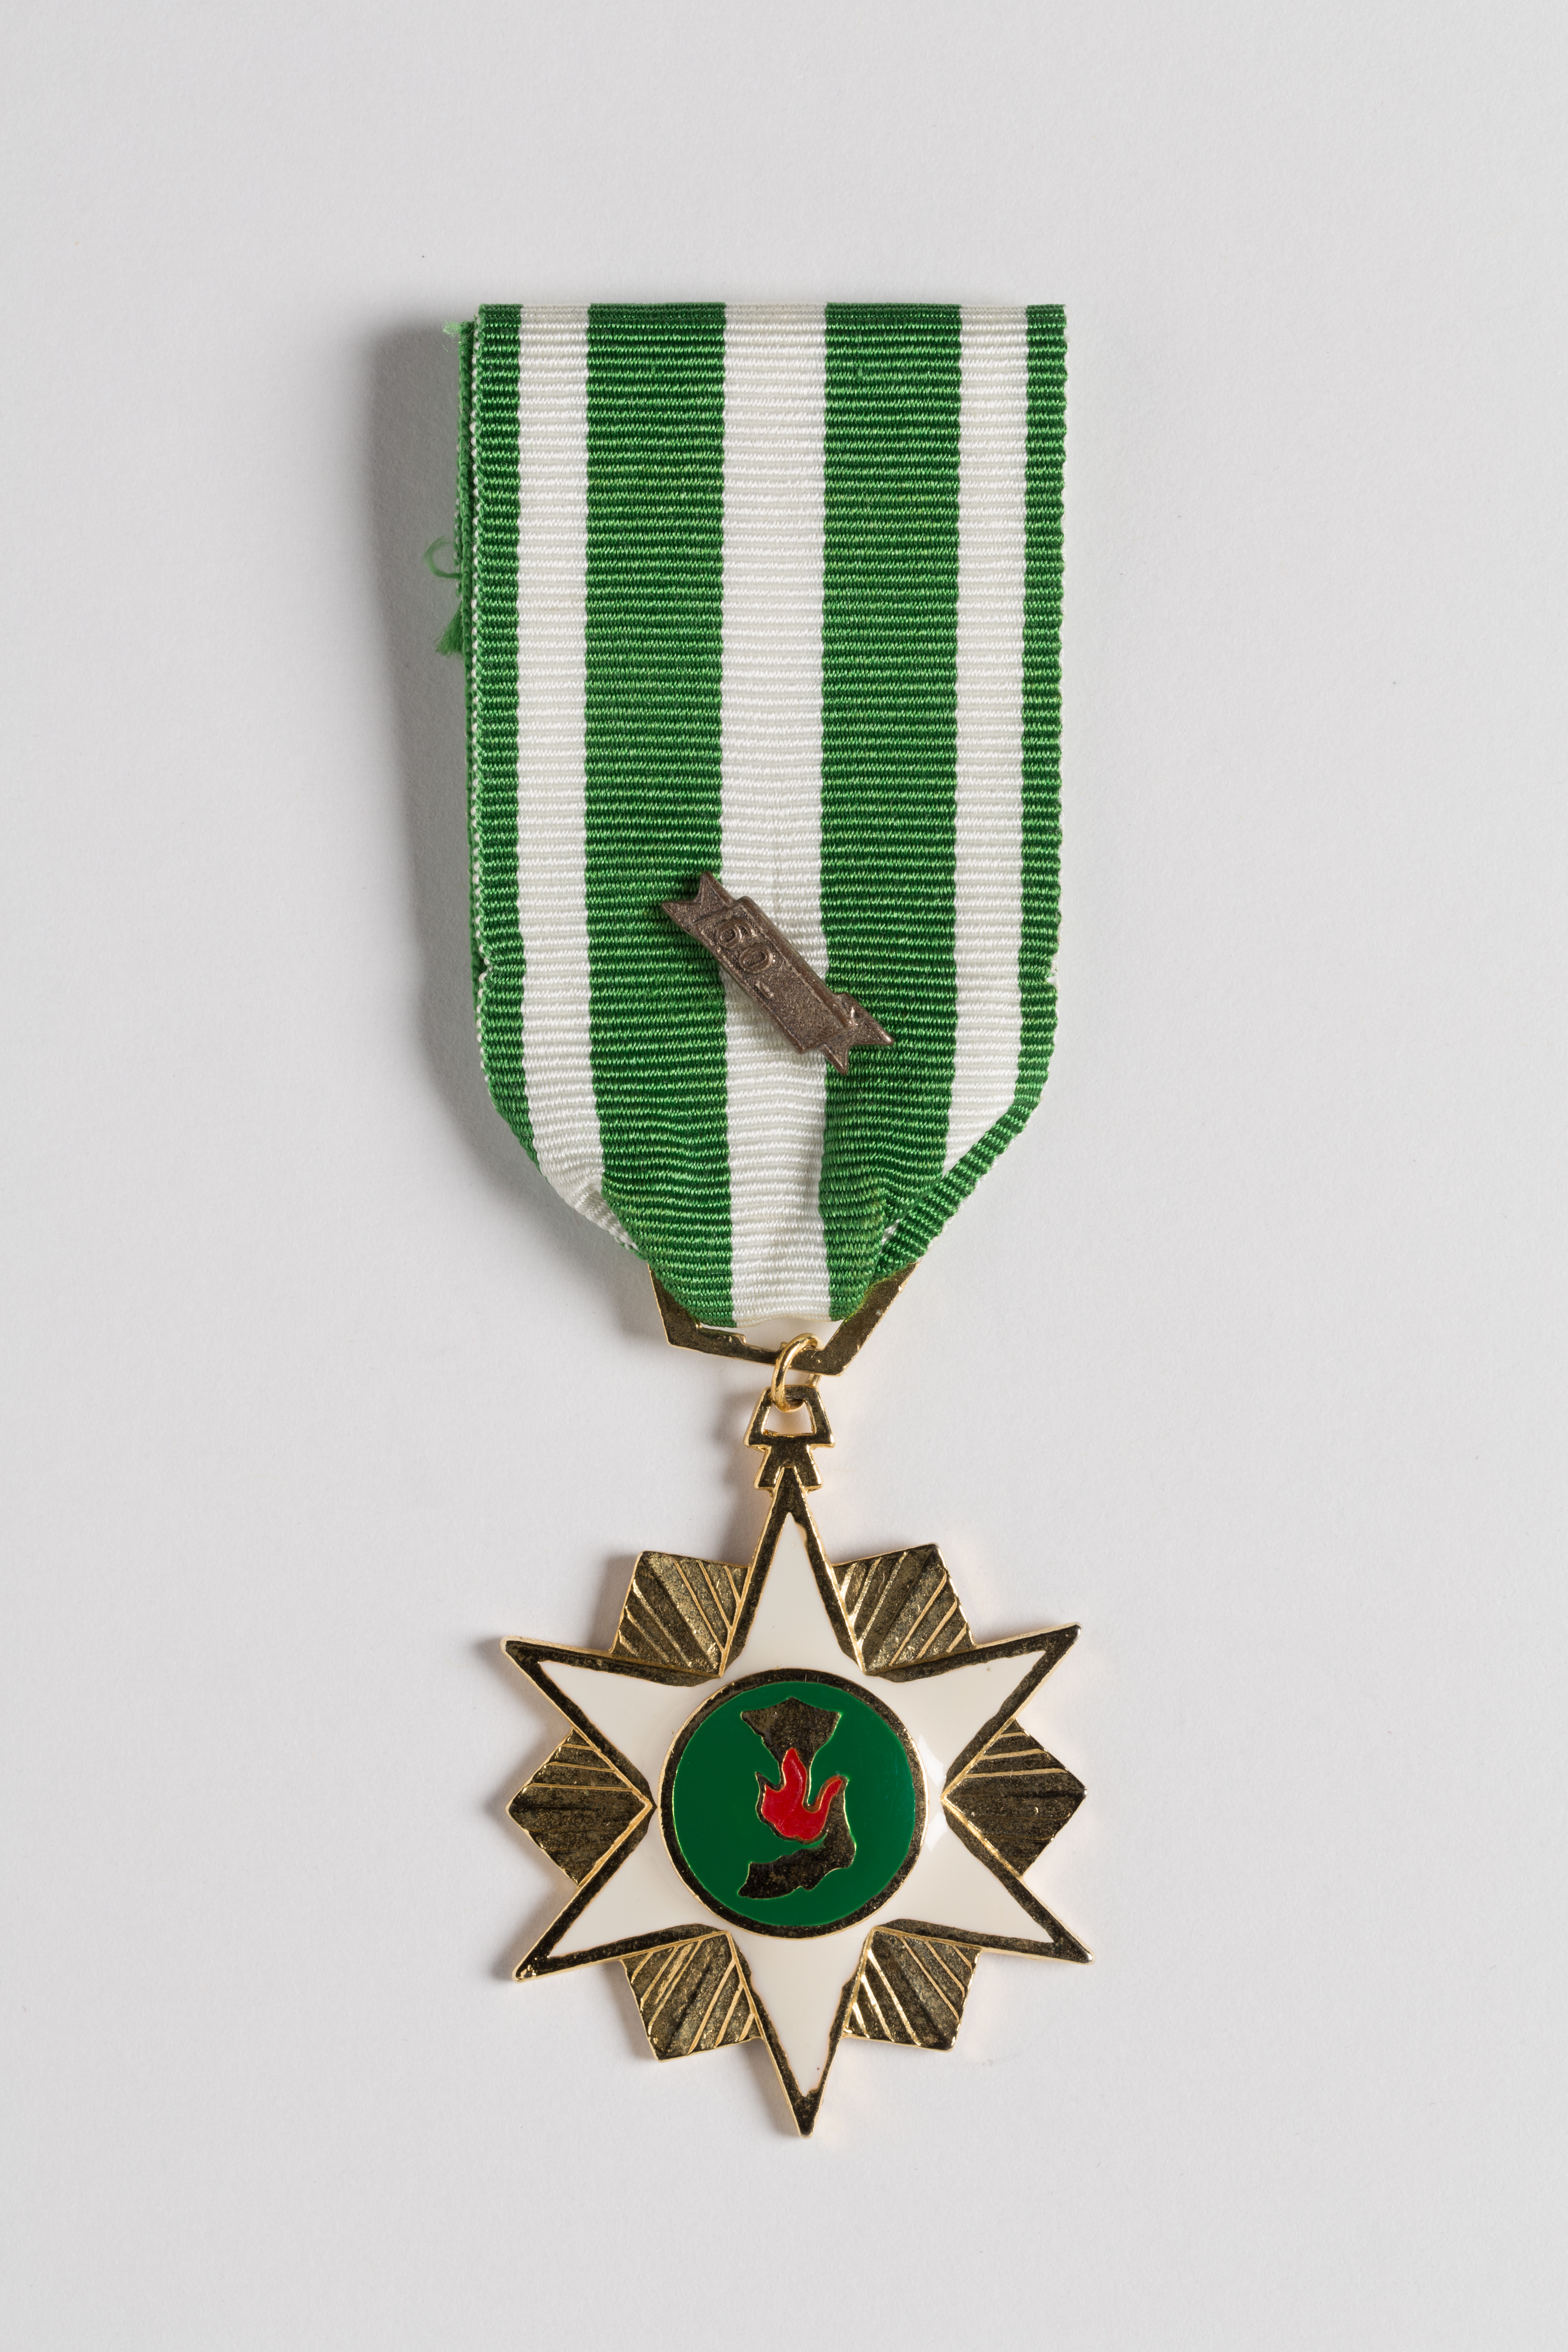 What does the vietnam campaign medal mean